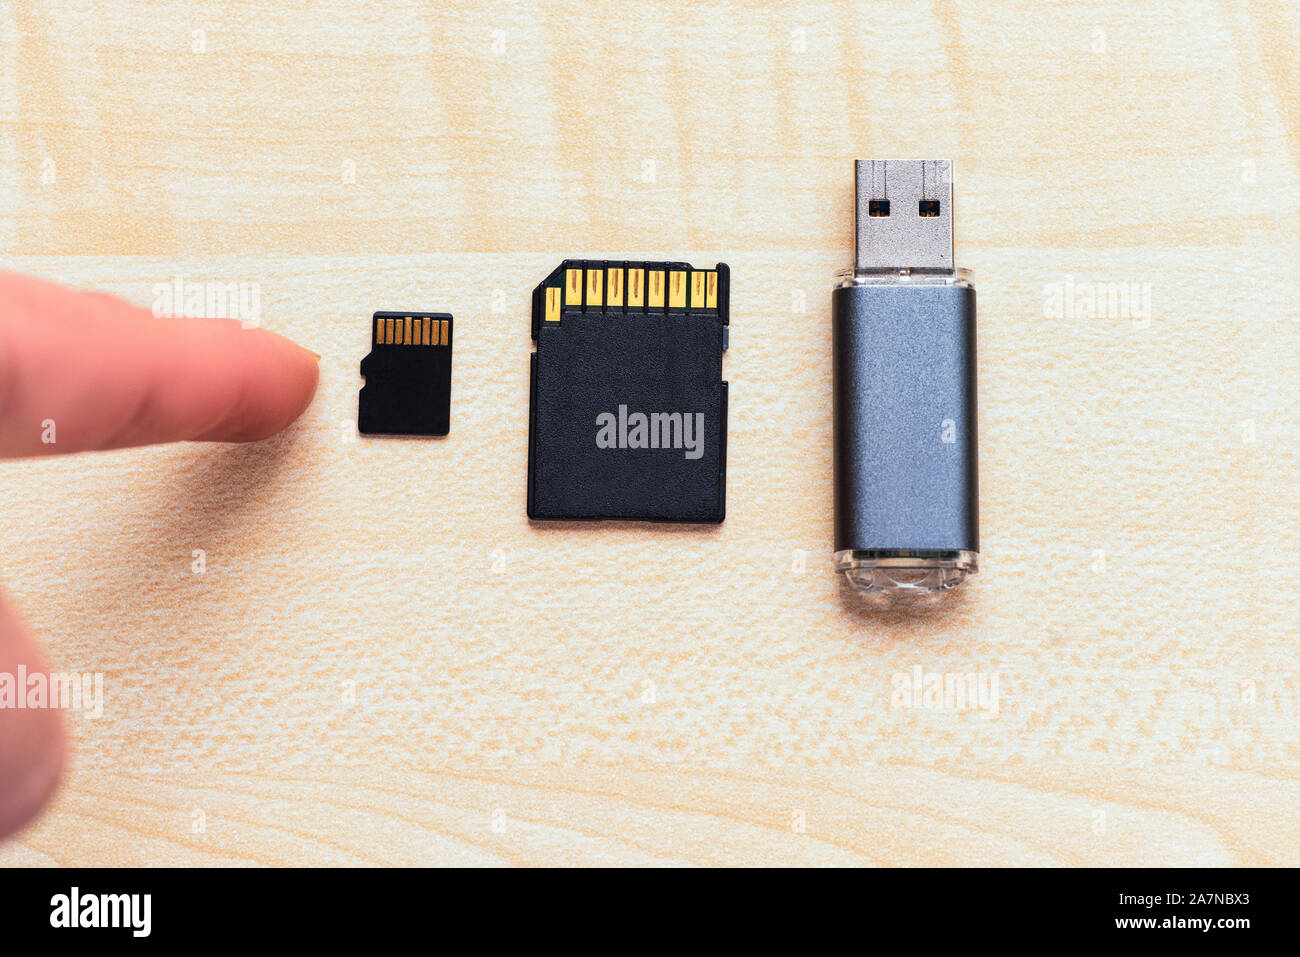 Set of equipment for storage information .Transfer or backup data. The  devices for store data flash drive, sd card and micro sd card Stock Photo -  Alamy